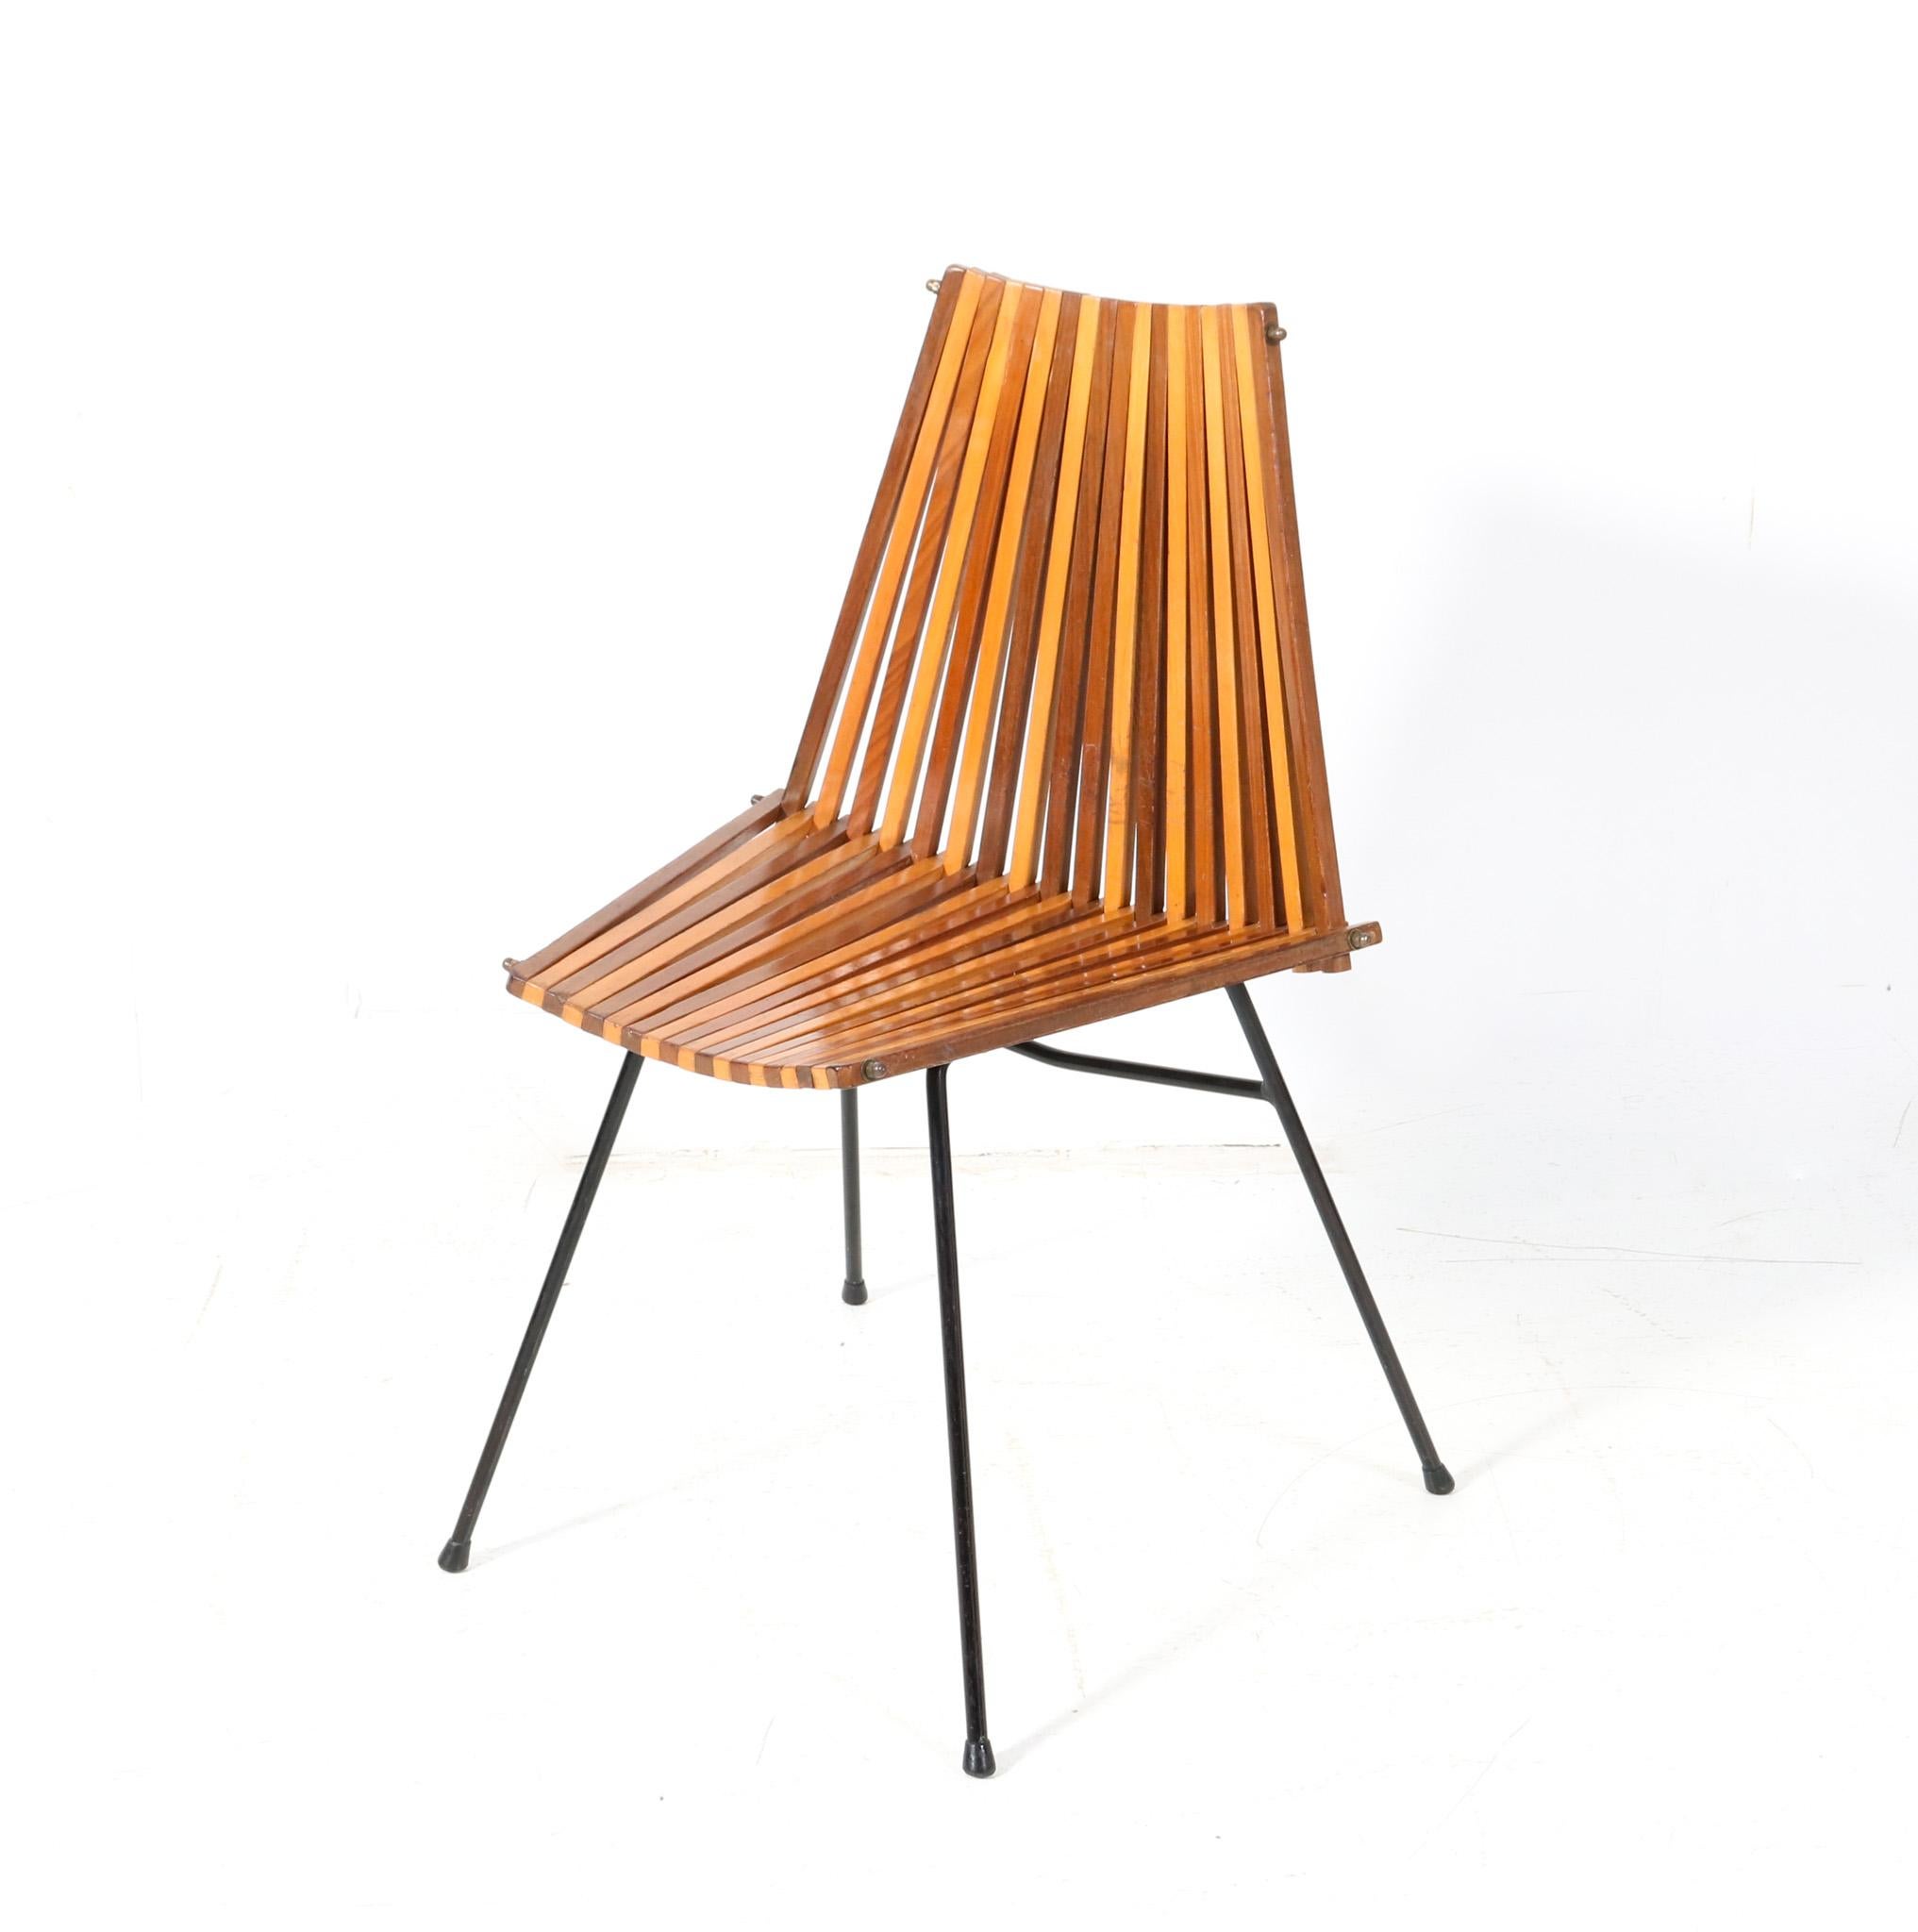 Dutch Mid-Century Modern Model 218 Side Chair by Dirk van Sliedregt for Rohé, 1961 For Sale